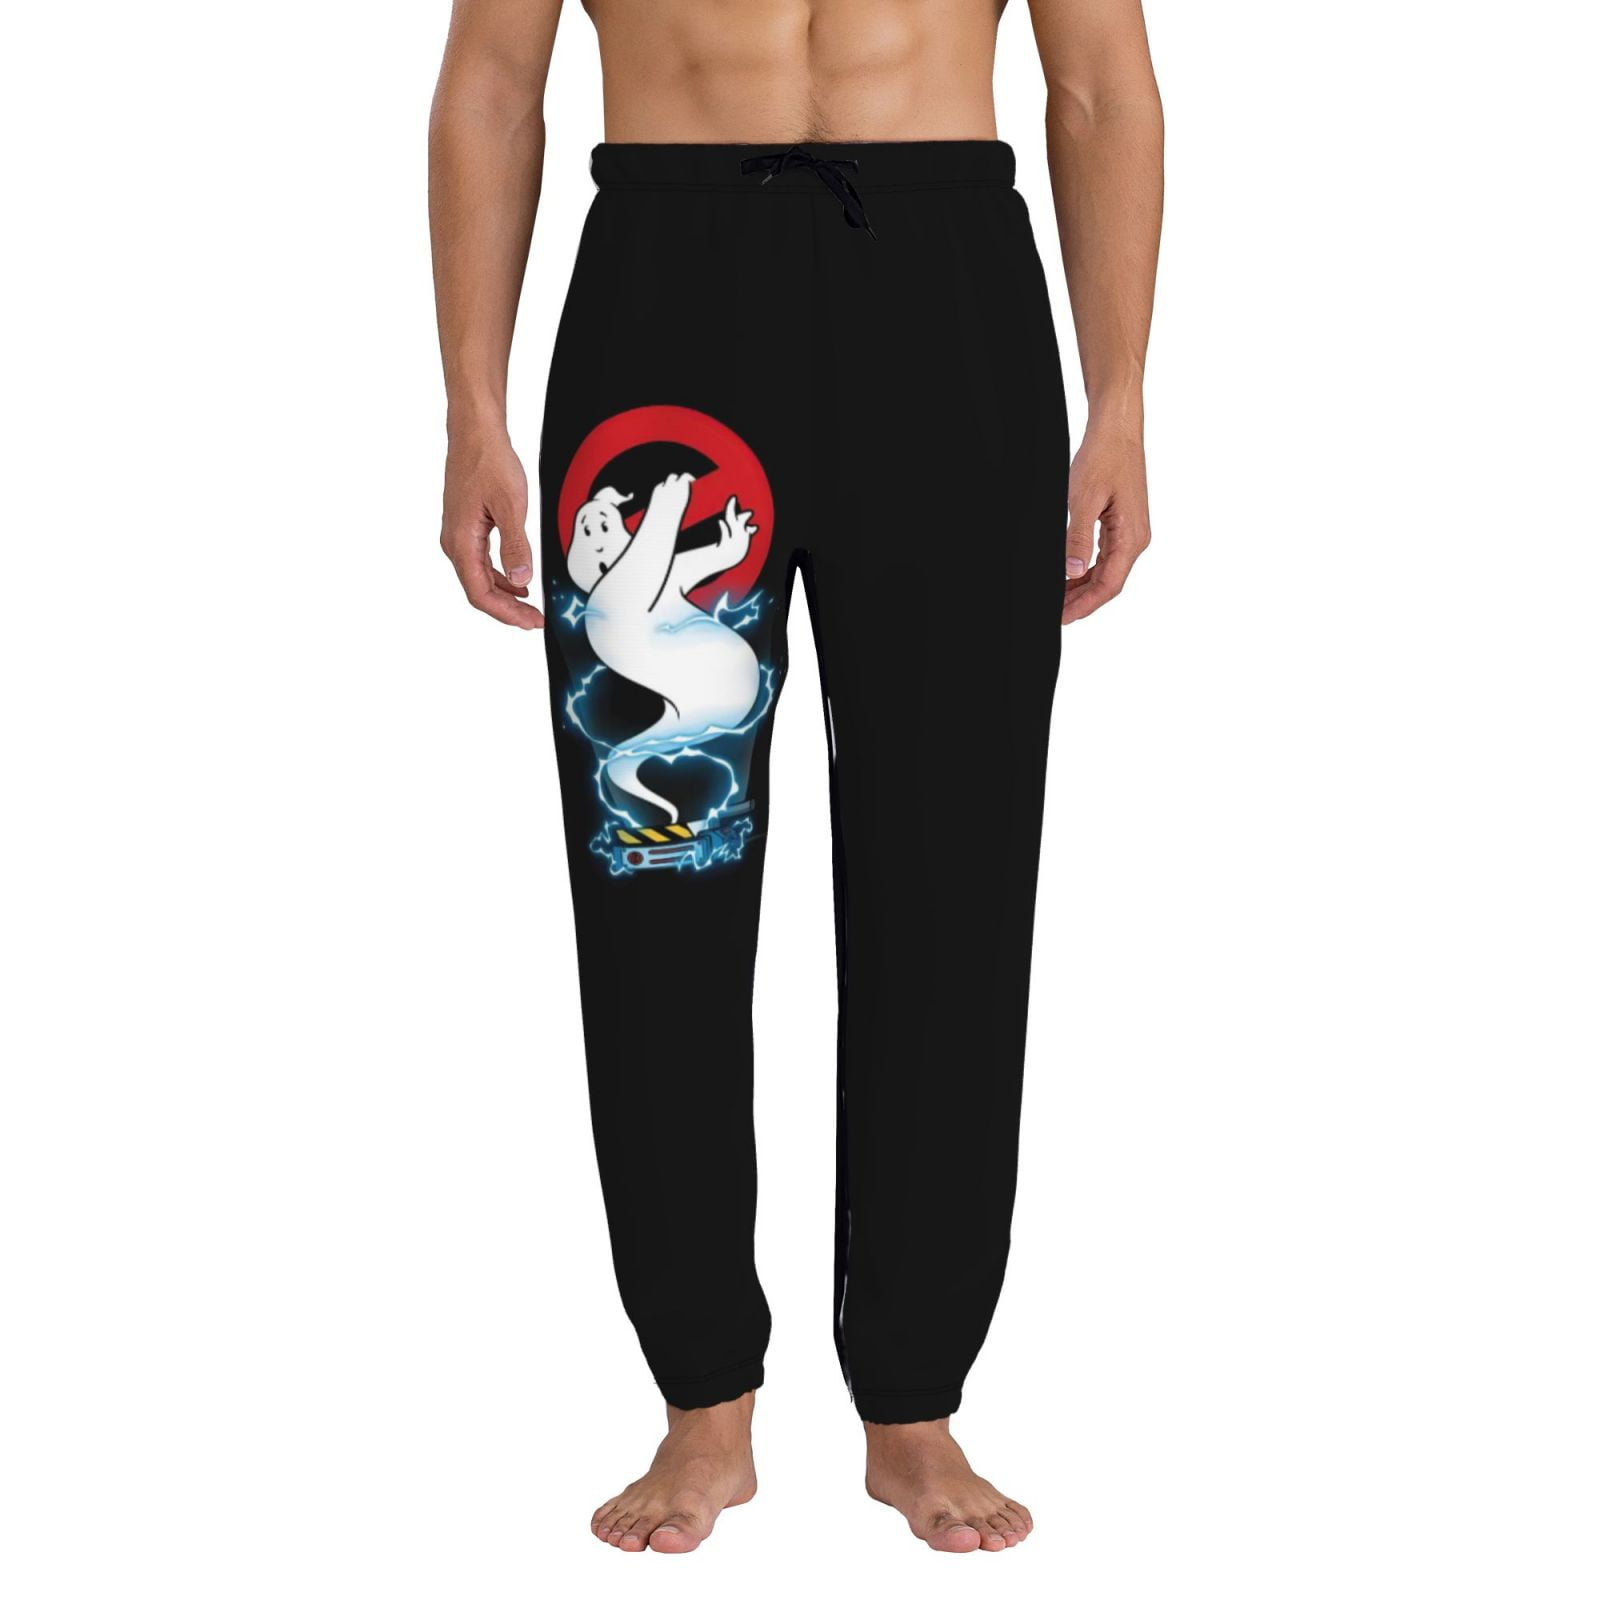 Men's Bottoms & Joggers - Muscle Nation